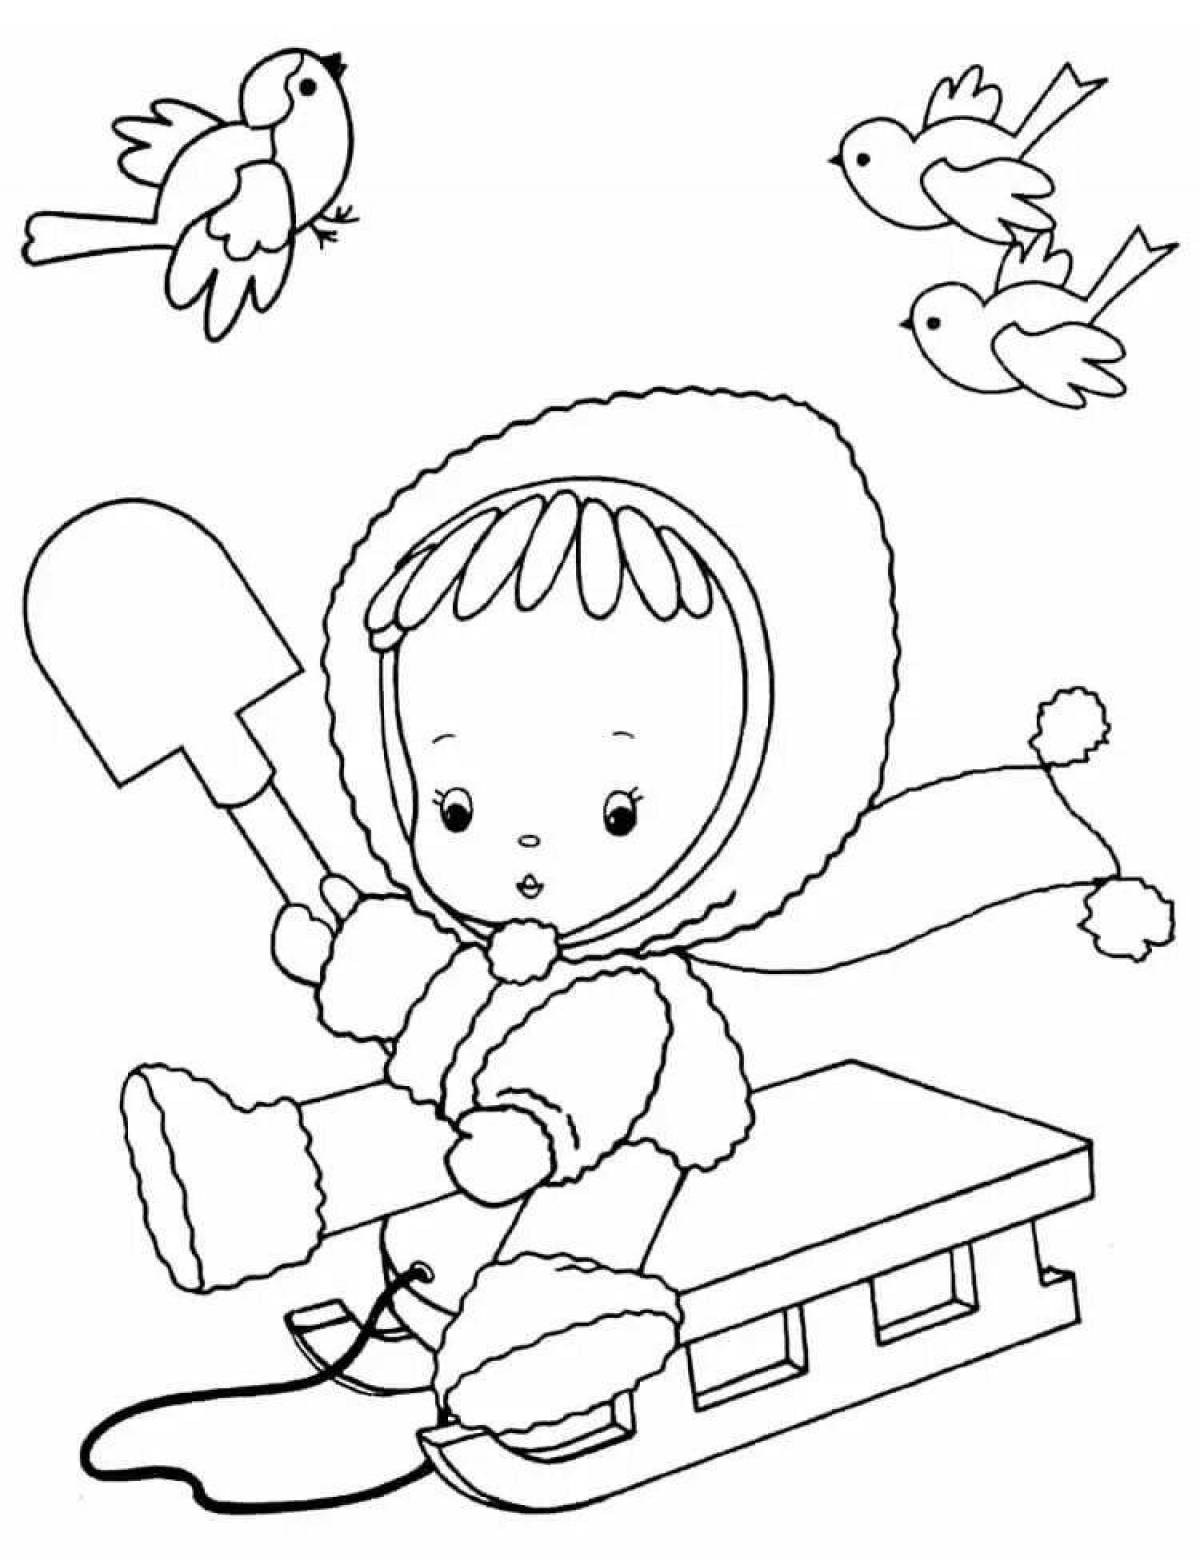 Colouring bright child on a sled